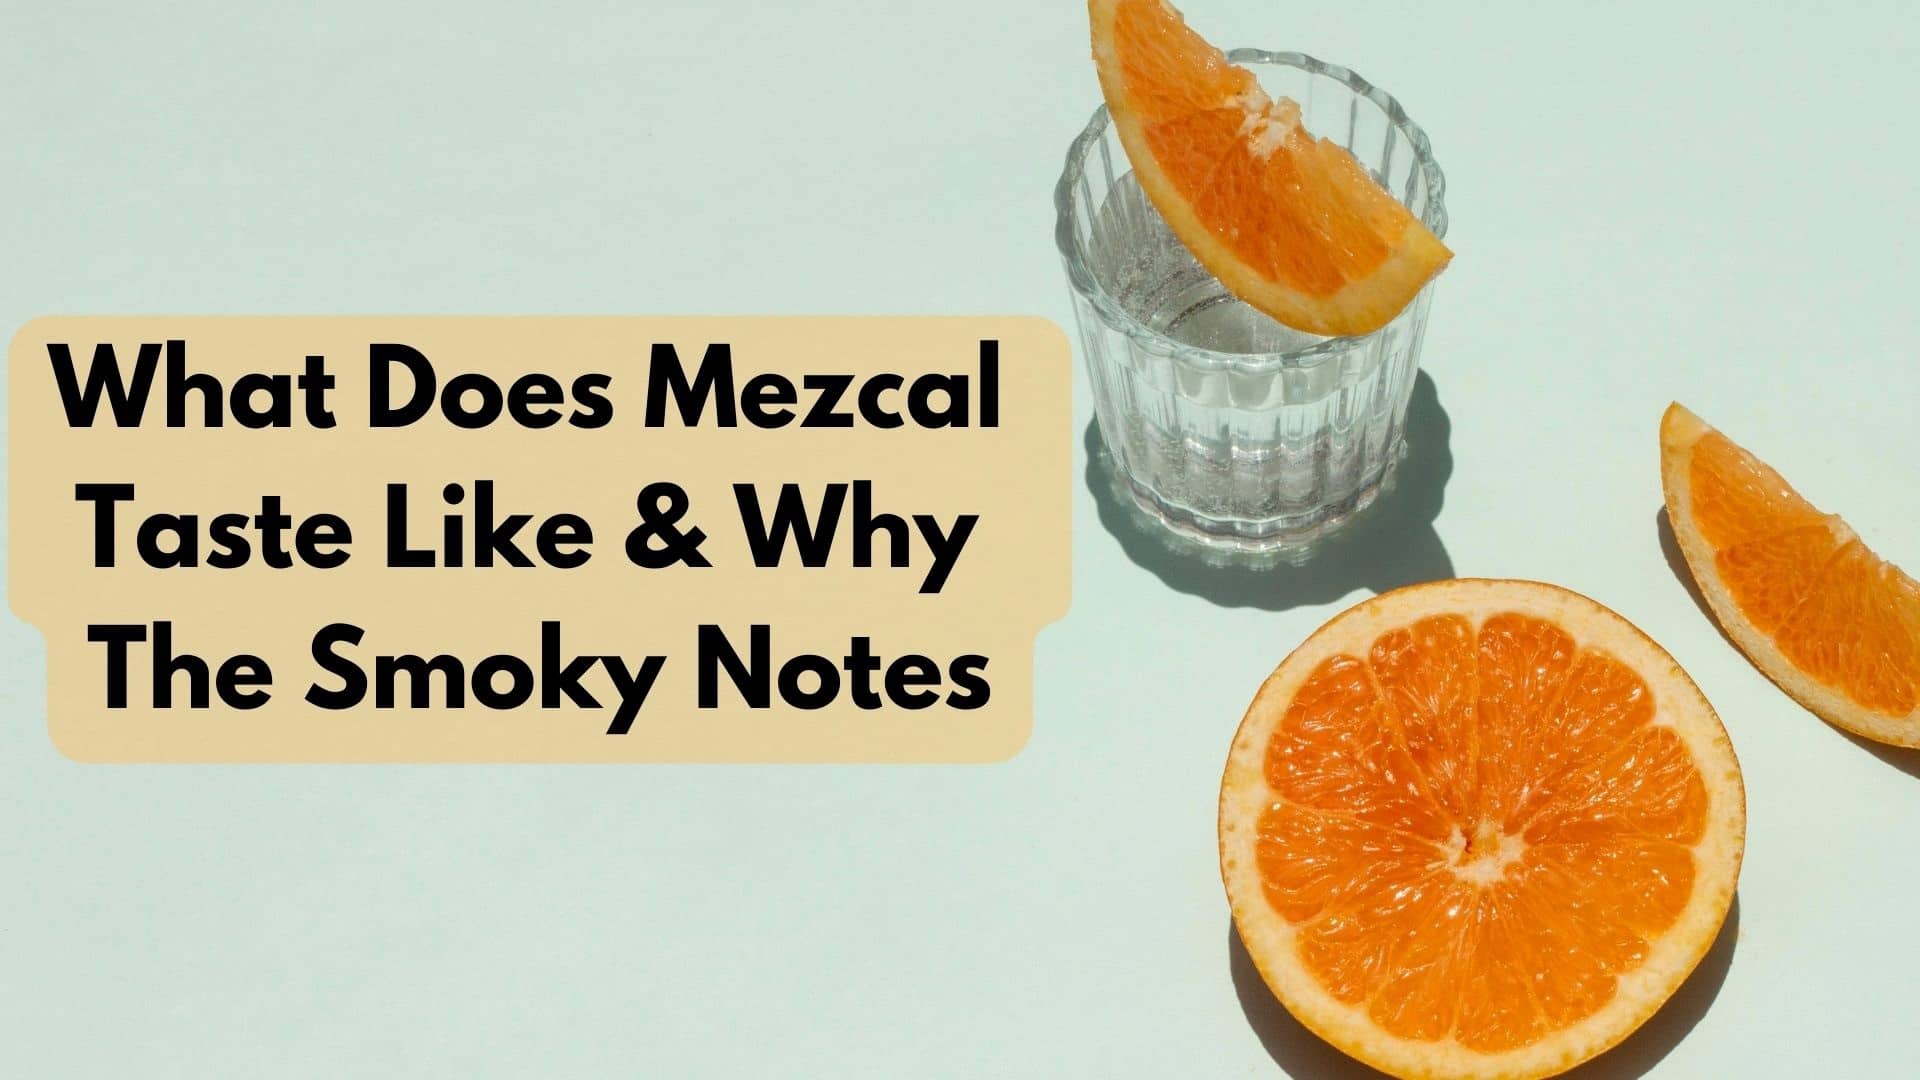 What Does Mezcal Taste Like And Why The Smoky Notes?